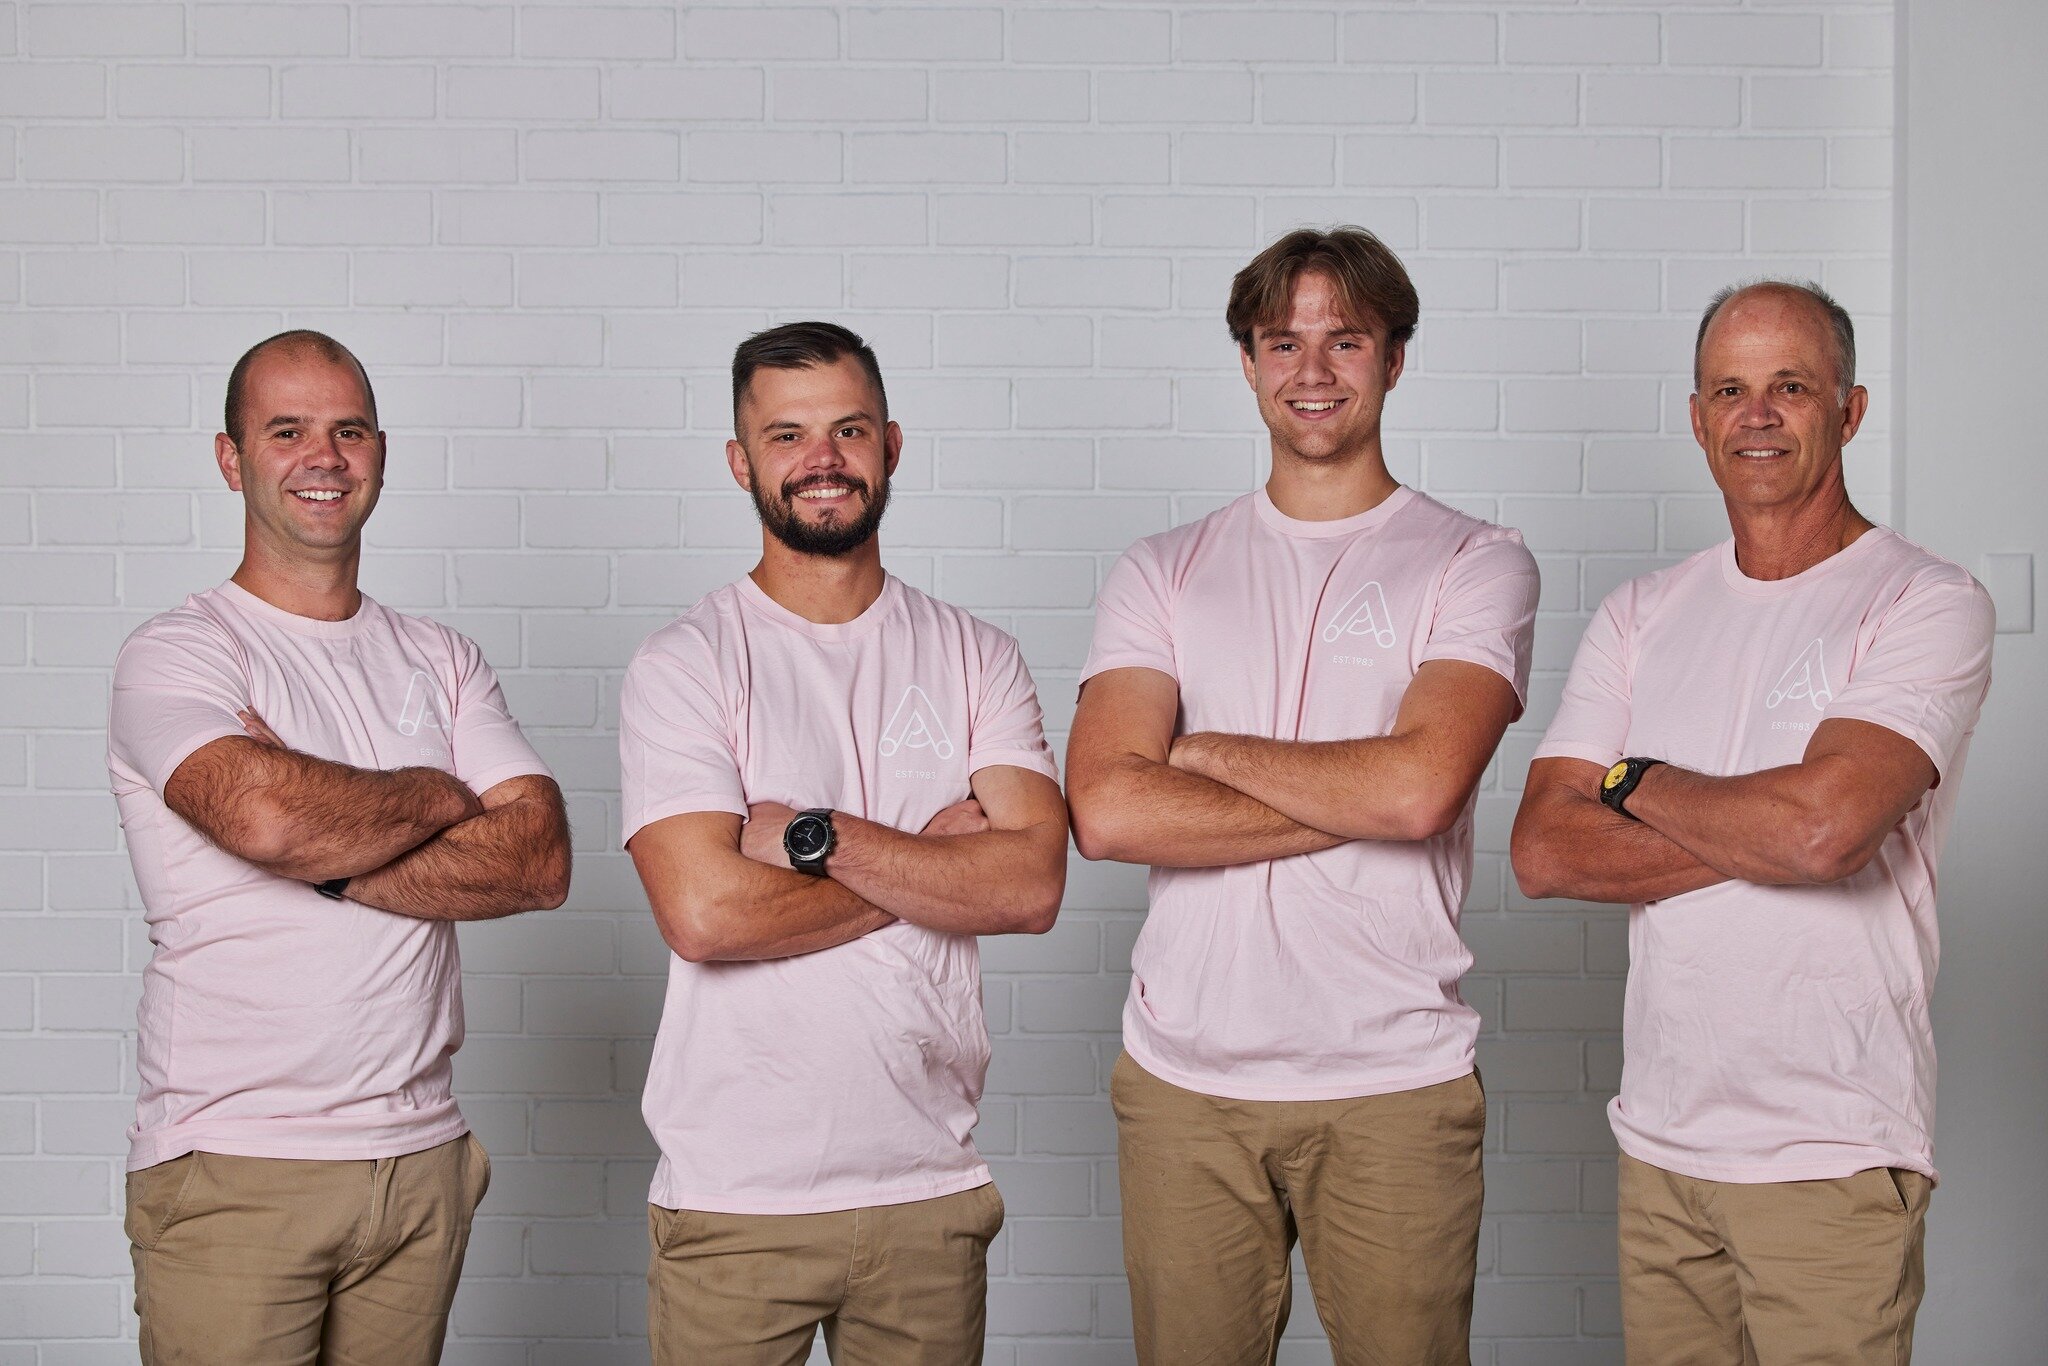 Everything is better in pink...

📸 @lightbulbstudio 
#ActionPlumbing #ActionPlumber #CanberraPlumber #CanberraSmallBusiness #supportlocal #supportsmallbusiness #familybusiness #canberraplumbers #canberrasmallbusiness #smallbusiness #actionplumbingca